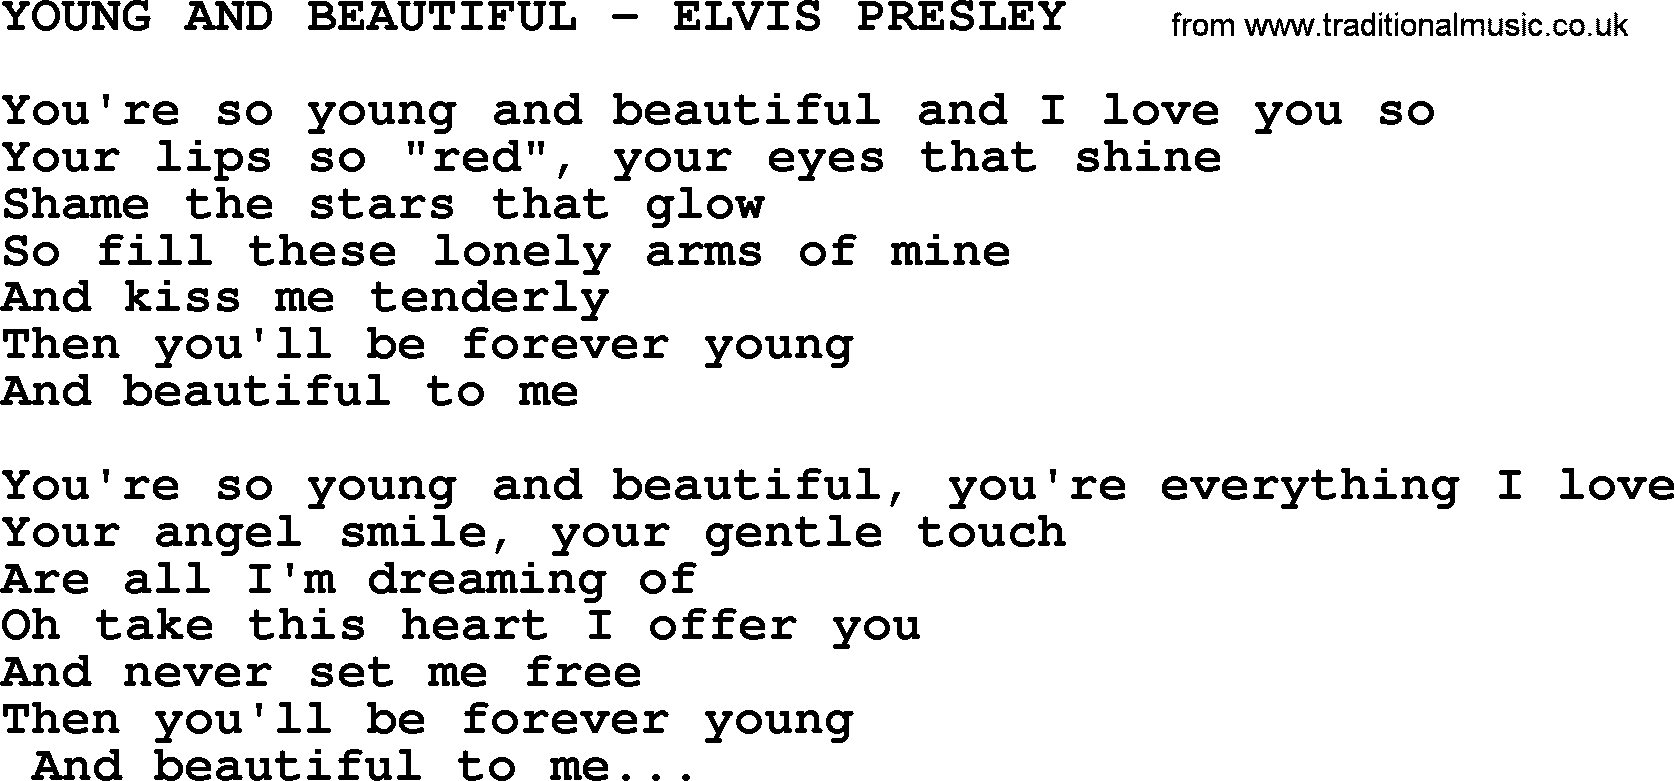 Elvis Presley song: Young And Beautiful-Elvis Presley-.txt lyrics and chords